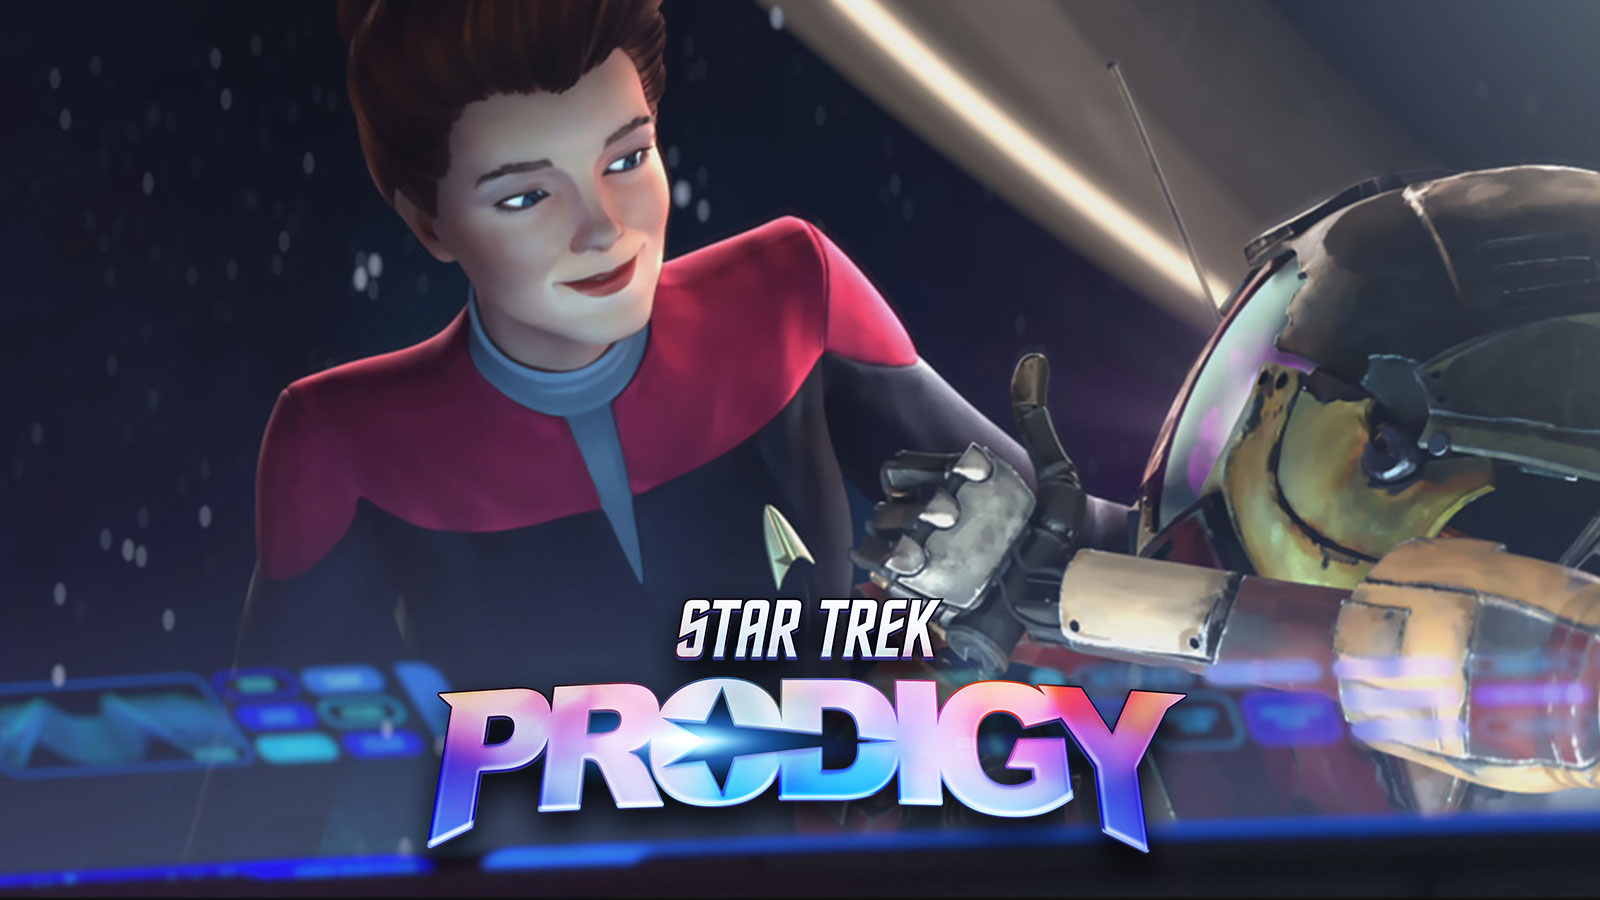 Star Trek: Prodigy Episode 4 "Dreamcatcher" Preview: The Crew Takes On Their First Away Mission